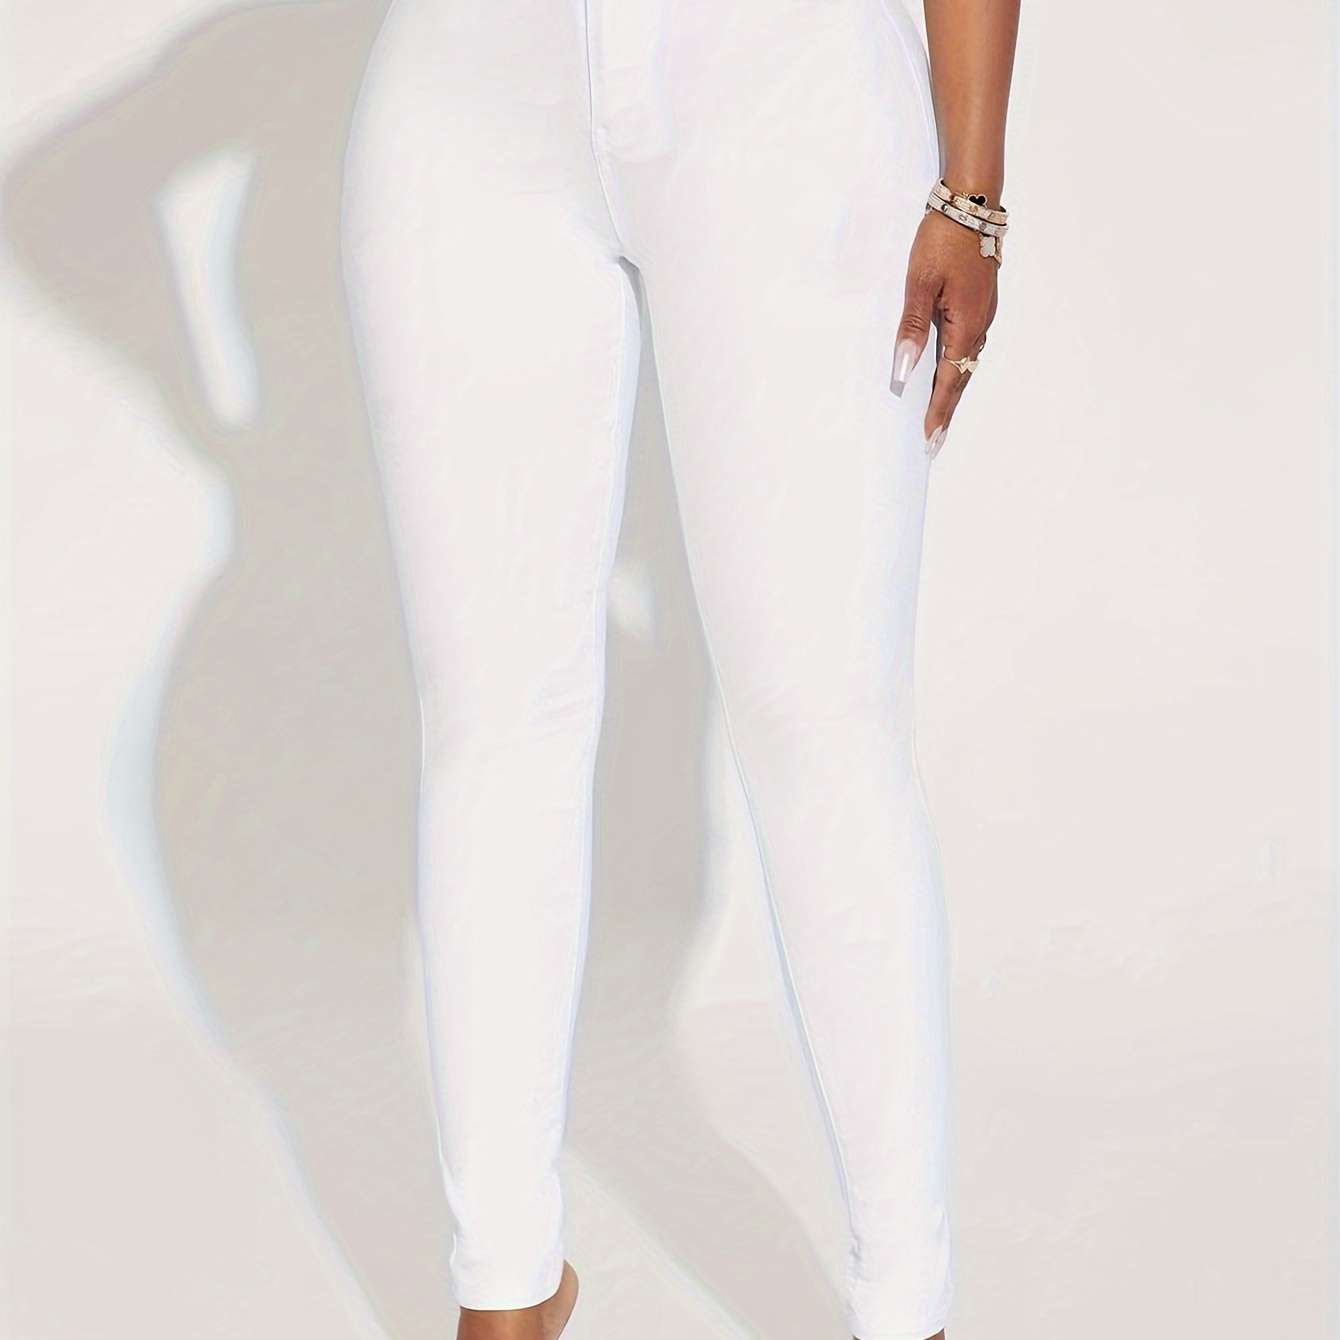 

White High Stretch Skinny Jeans, Slim Fit Versatile Tight Jeans, Women's Denim Jeans & Clothing